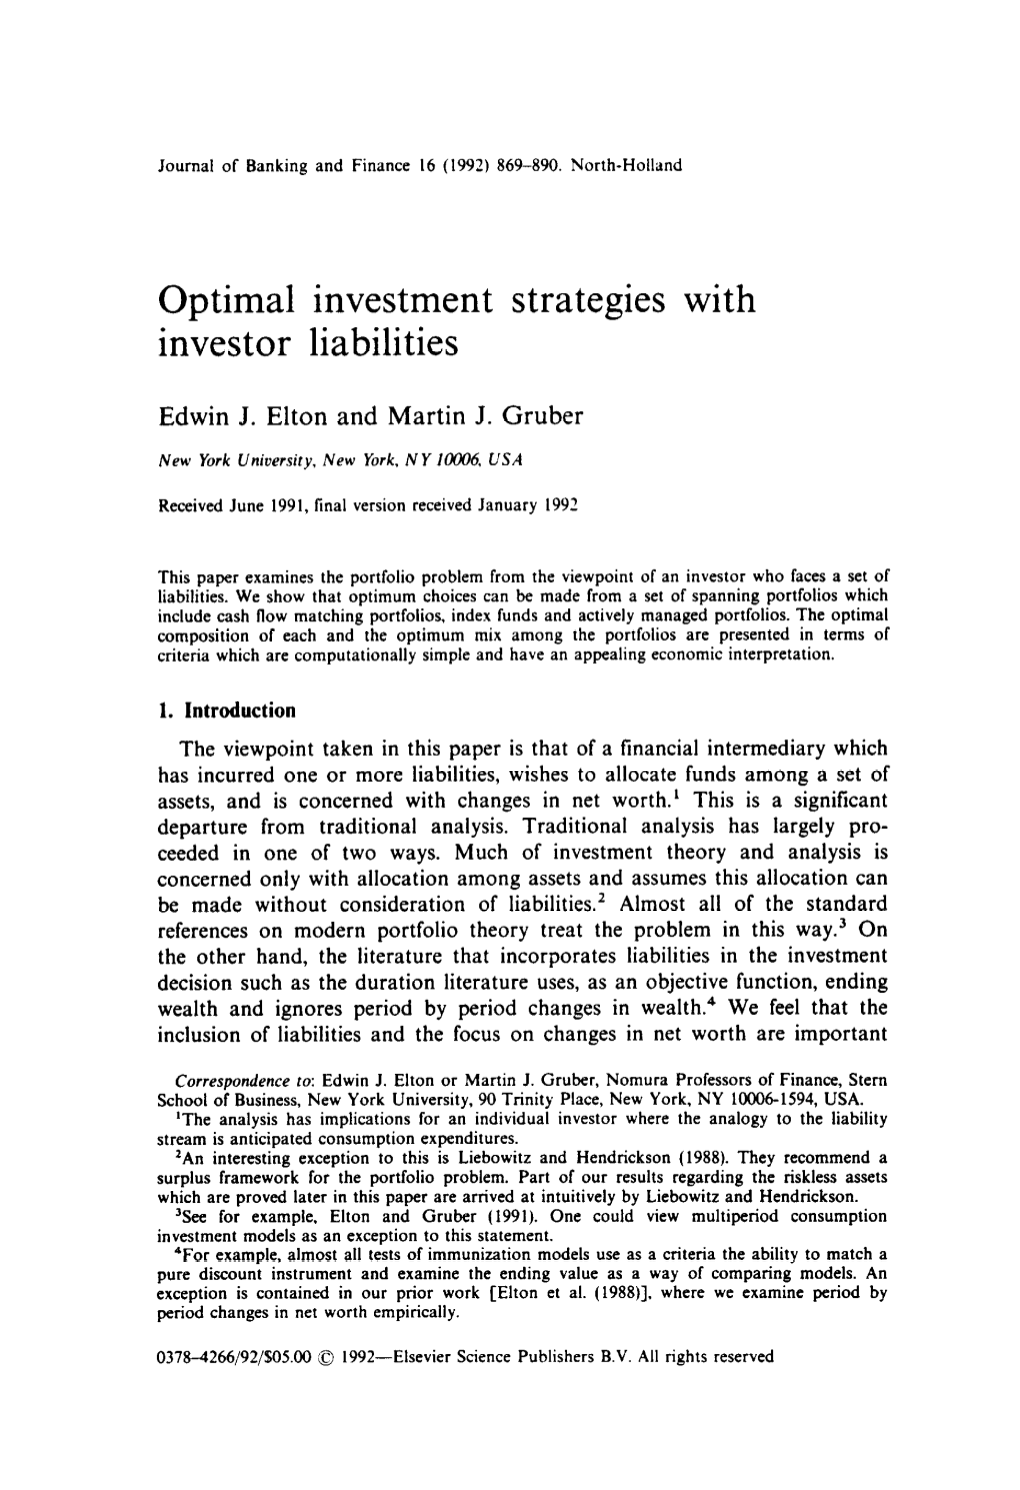 Optimal Investment Strategies with Investor Liabilities